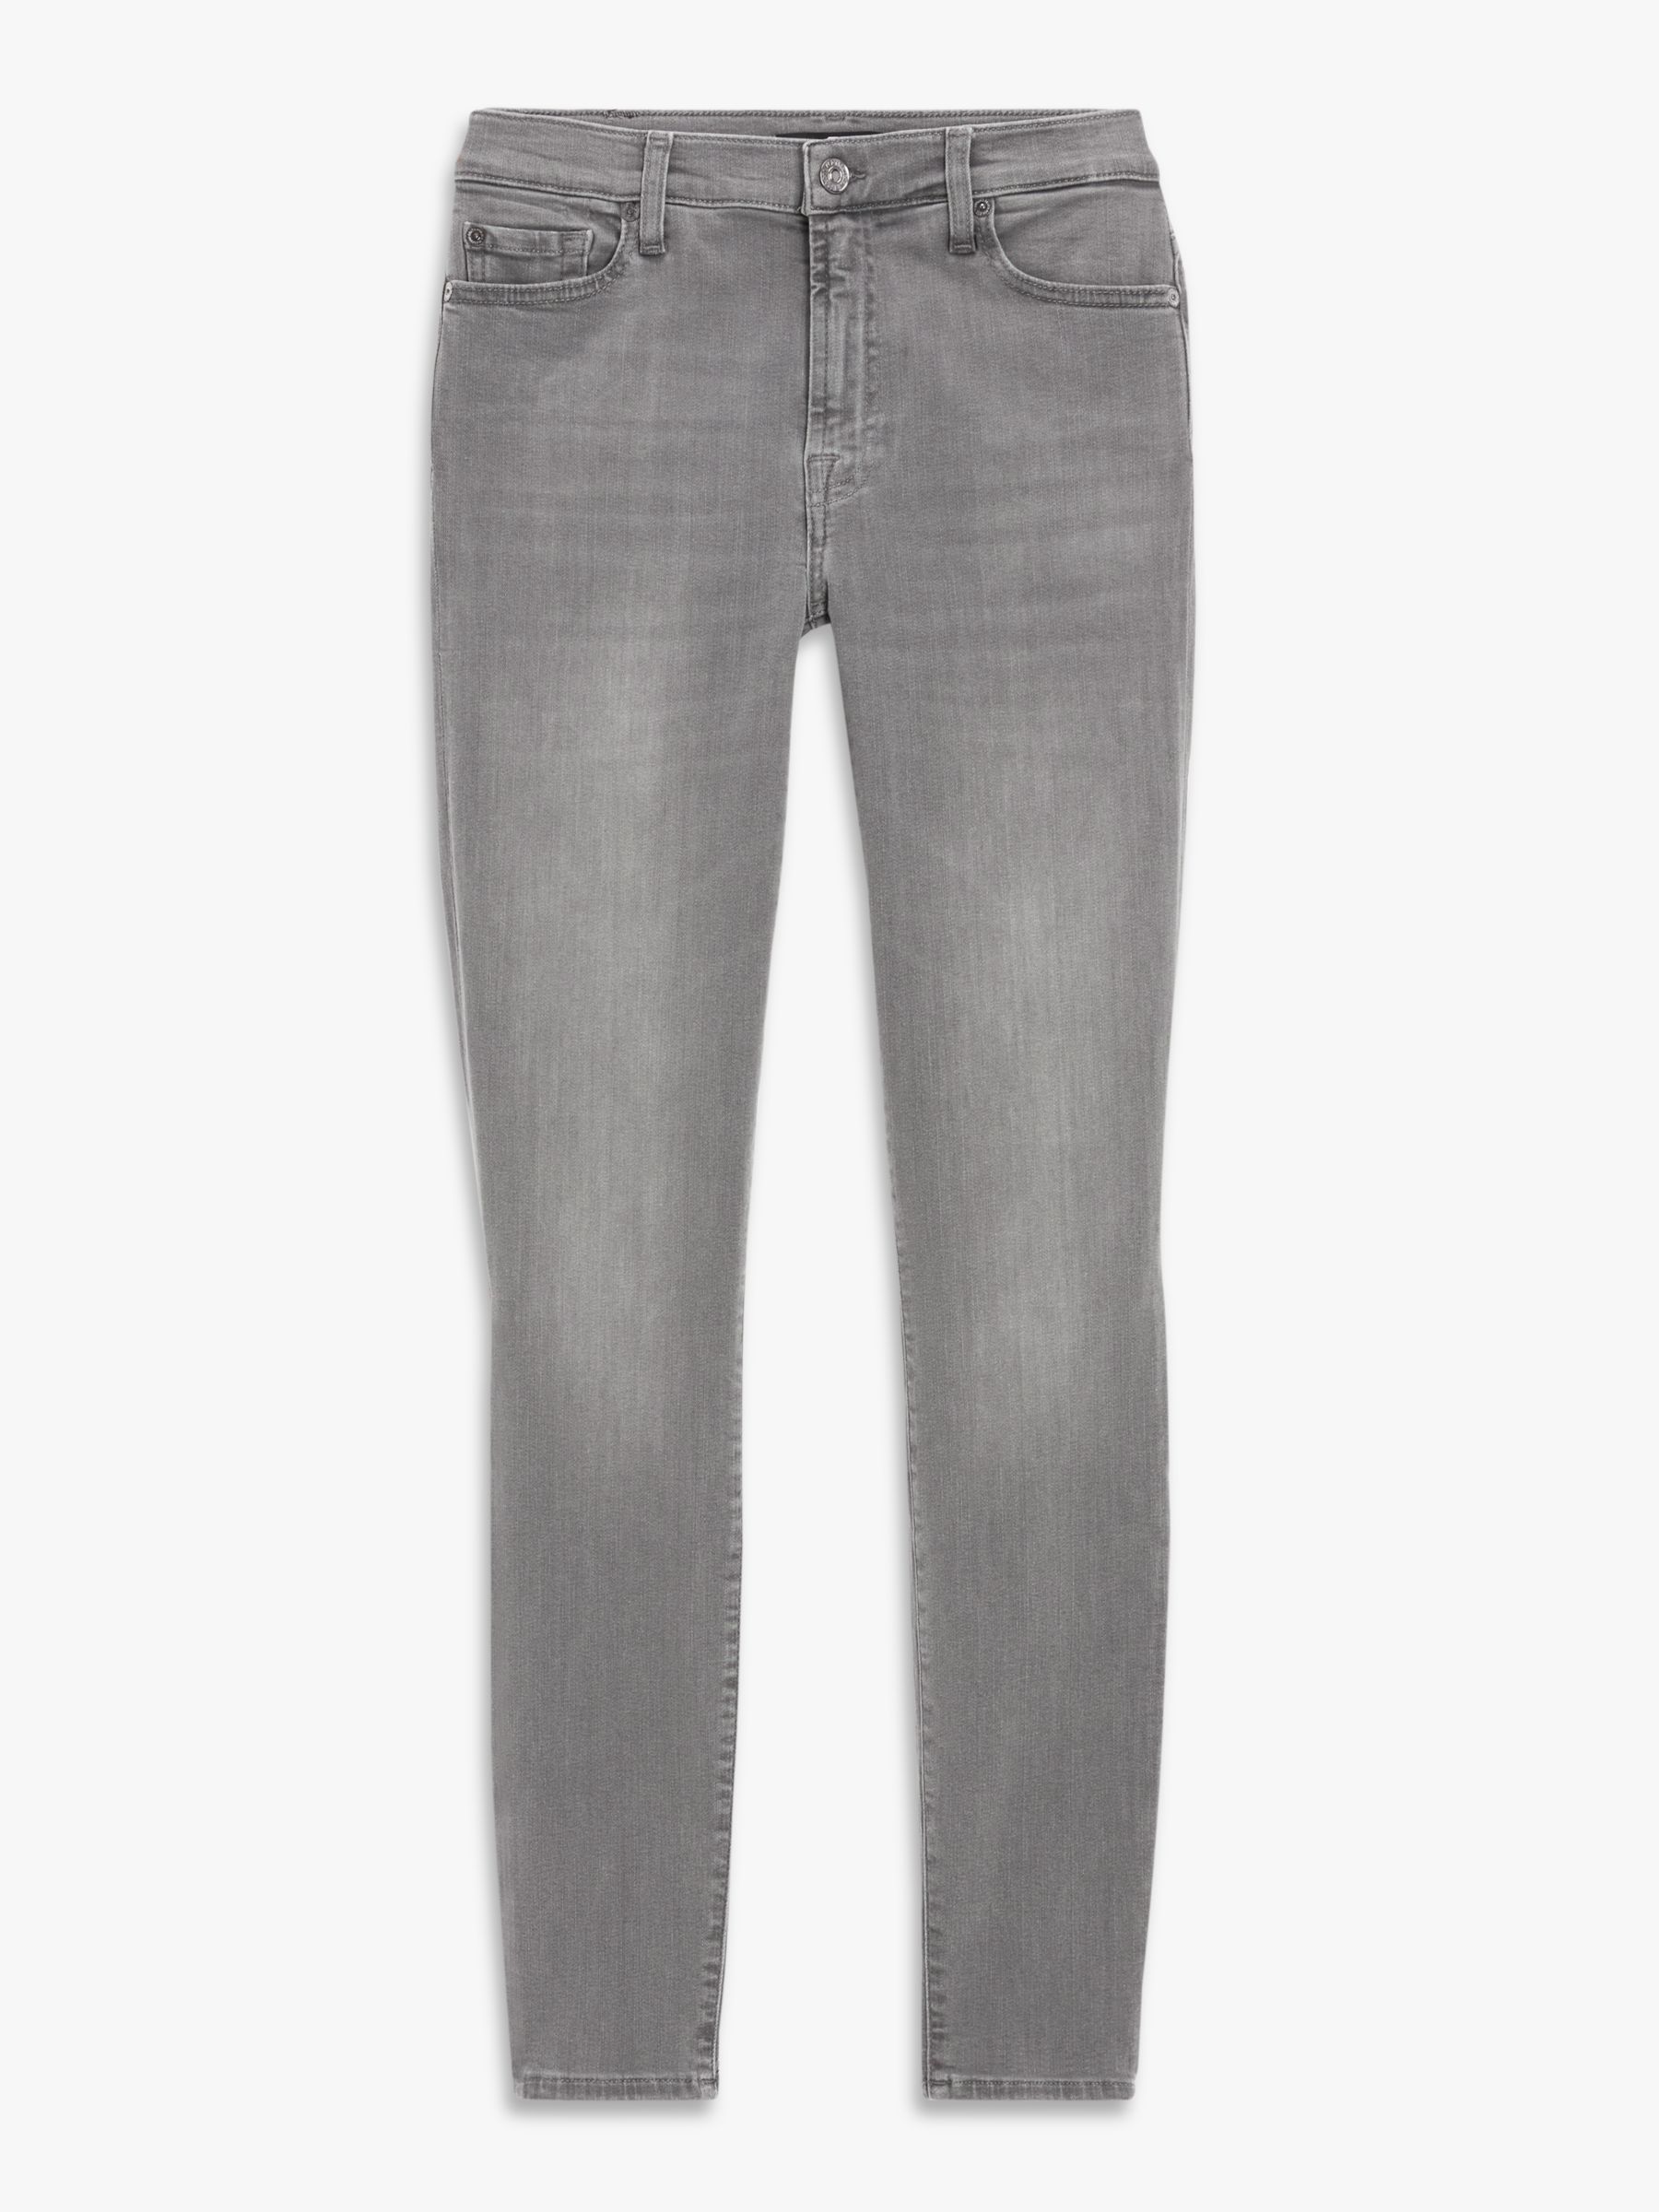 7 For All Mankind Skinny Slim Fit Jeans, Grey, 24